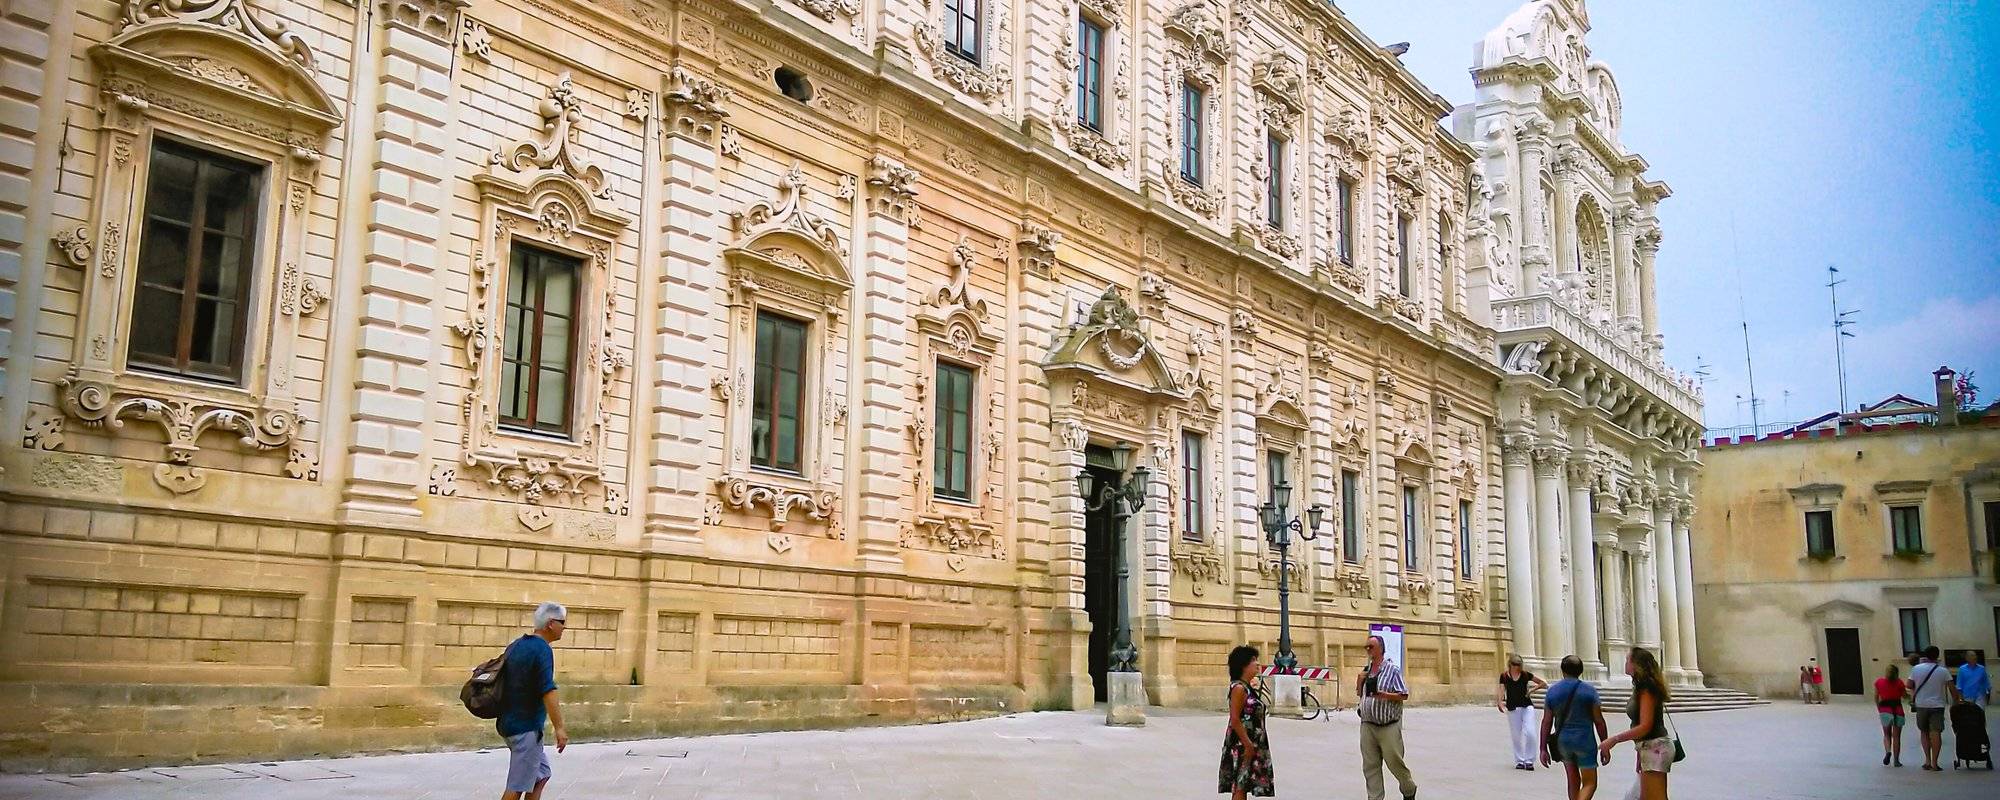 A trip to Lecce (Italy) among baroque churches and picturesque alleyways!